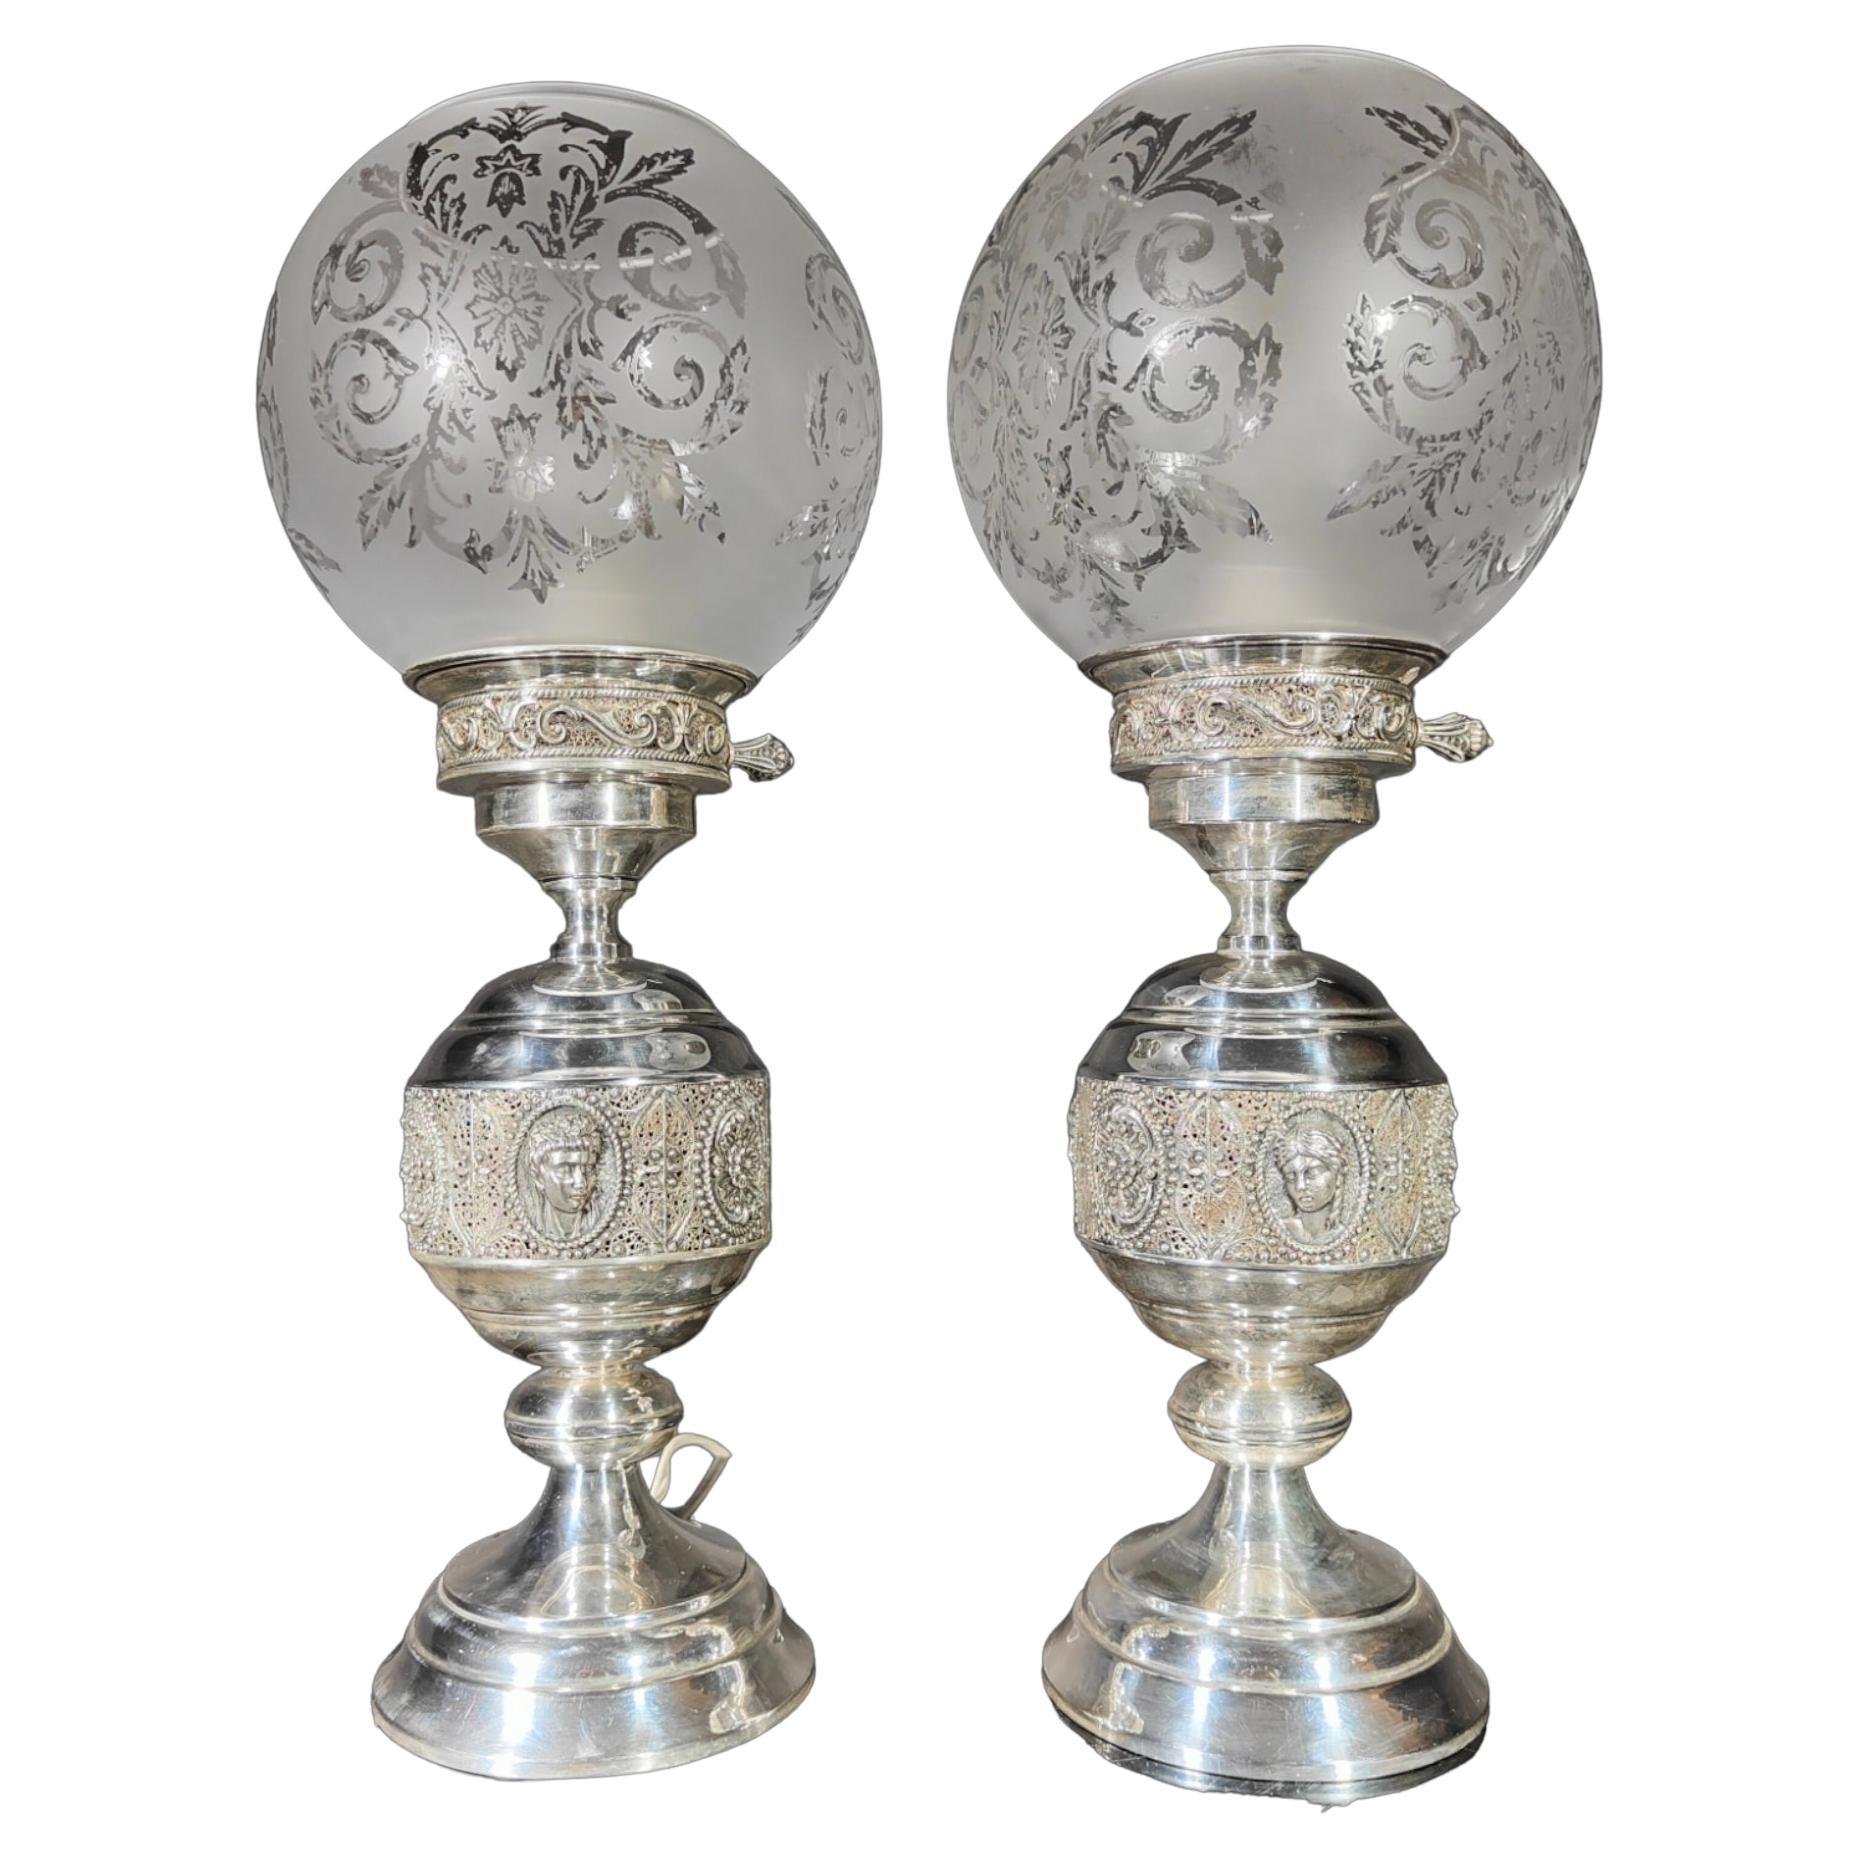 Pair of Lamps in Sterling Silver with Filigree